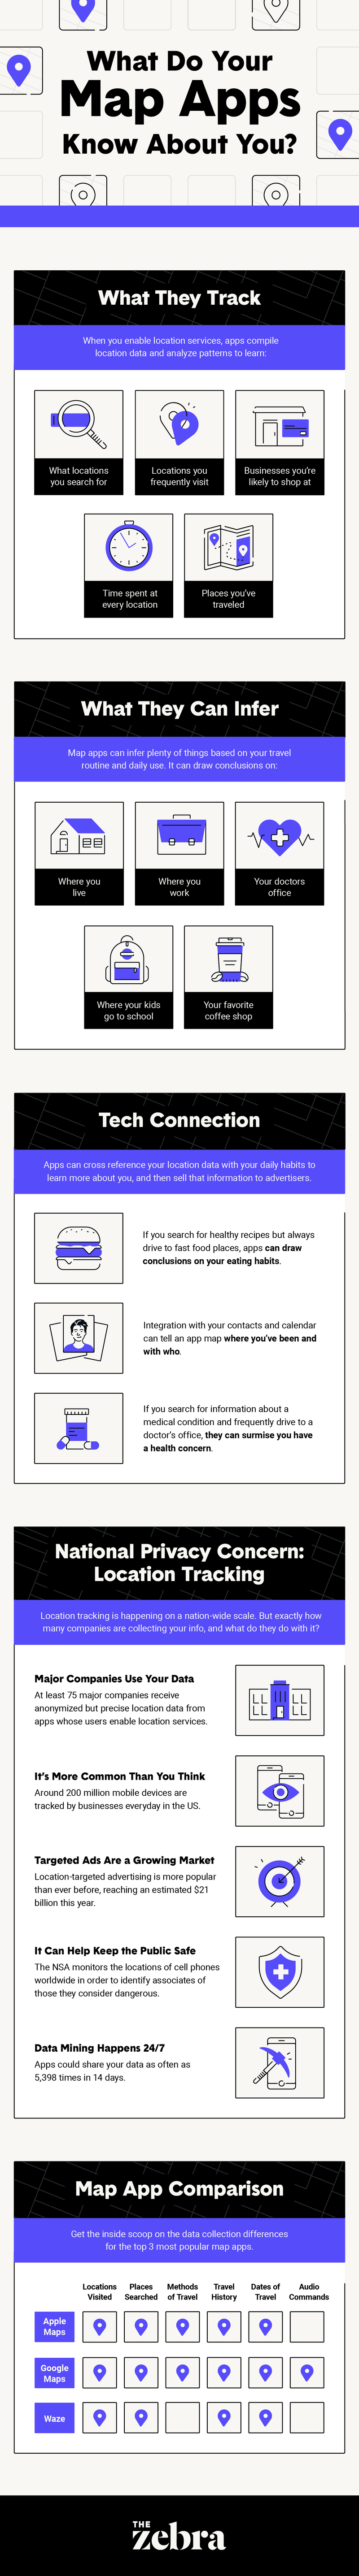 location services privacy concerns infographic